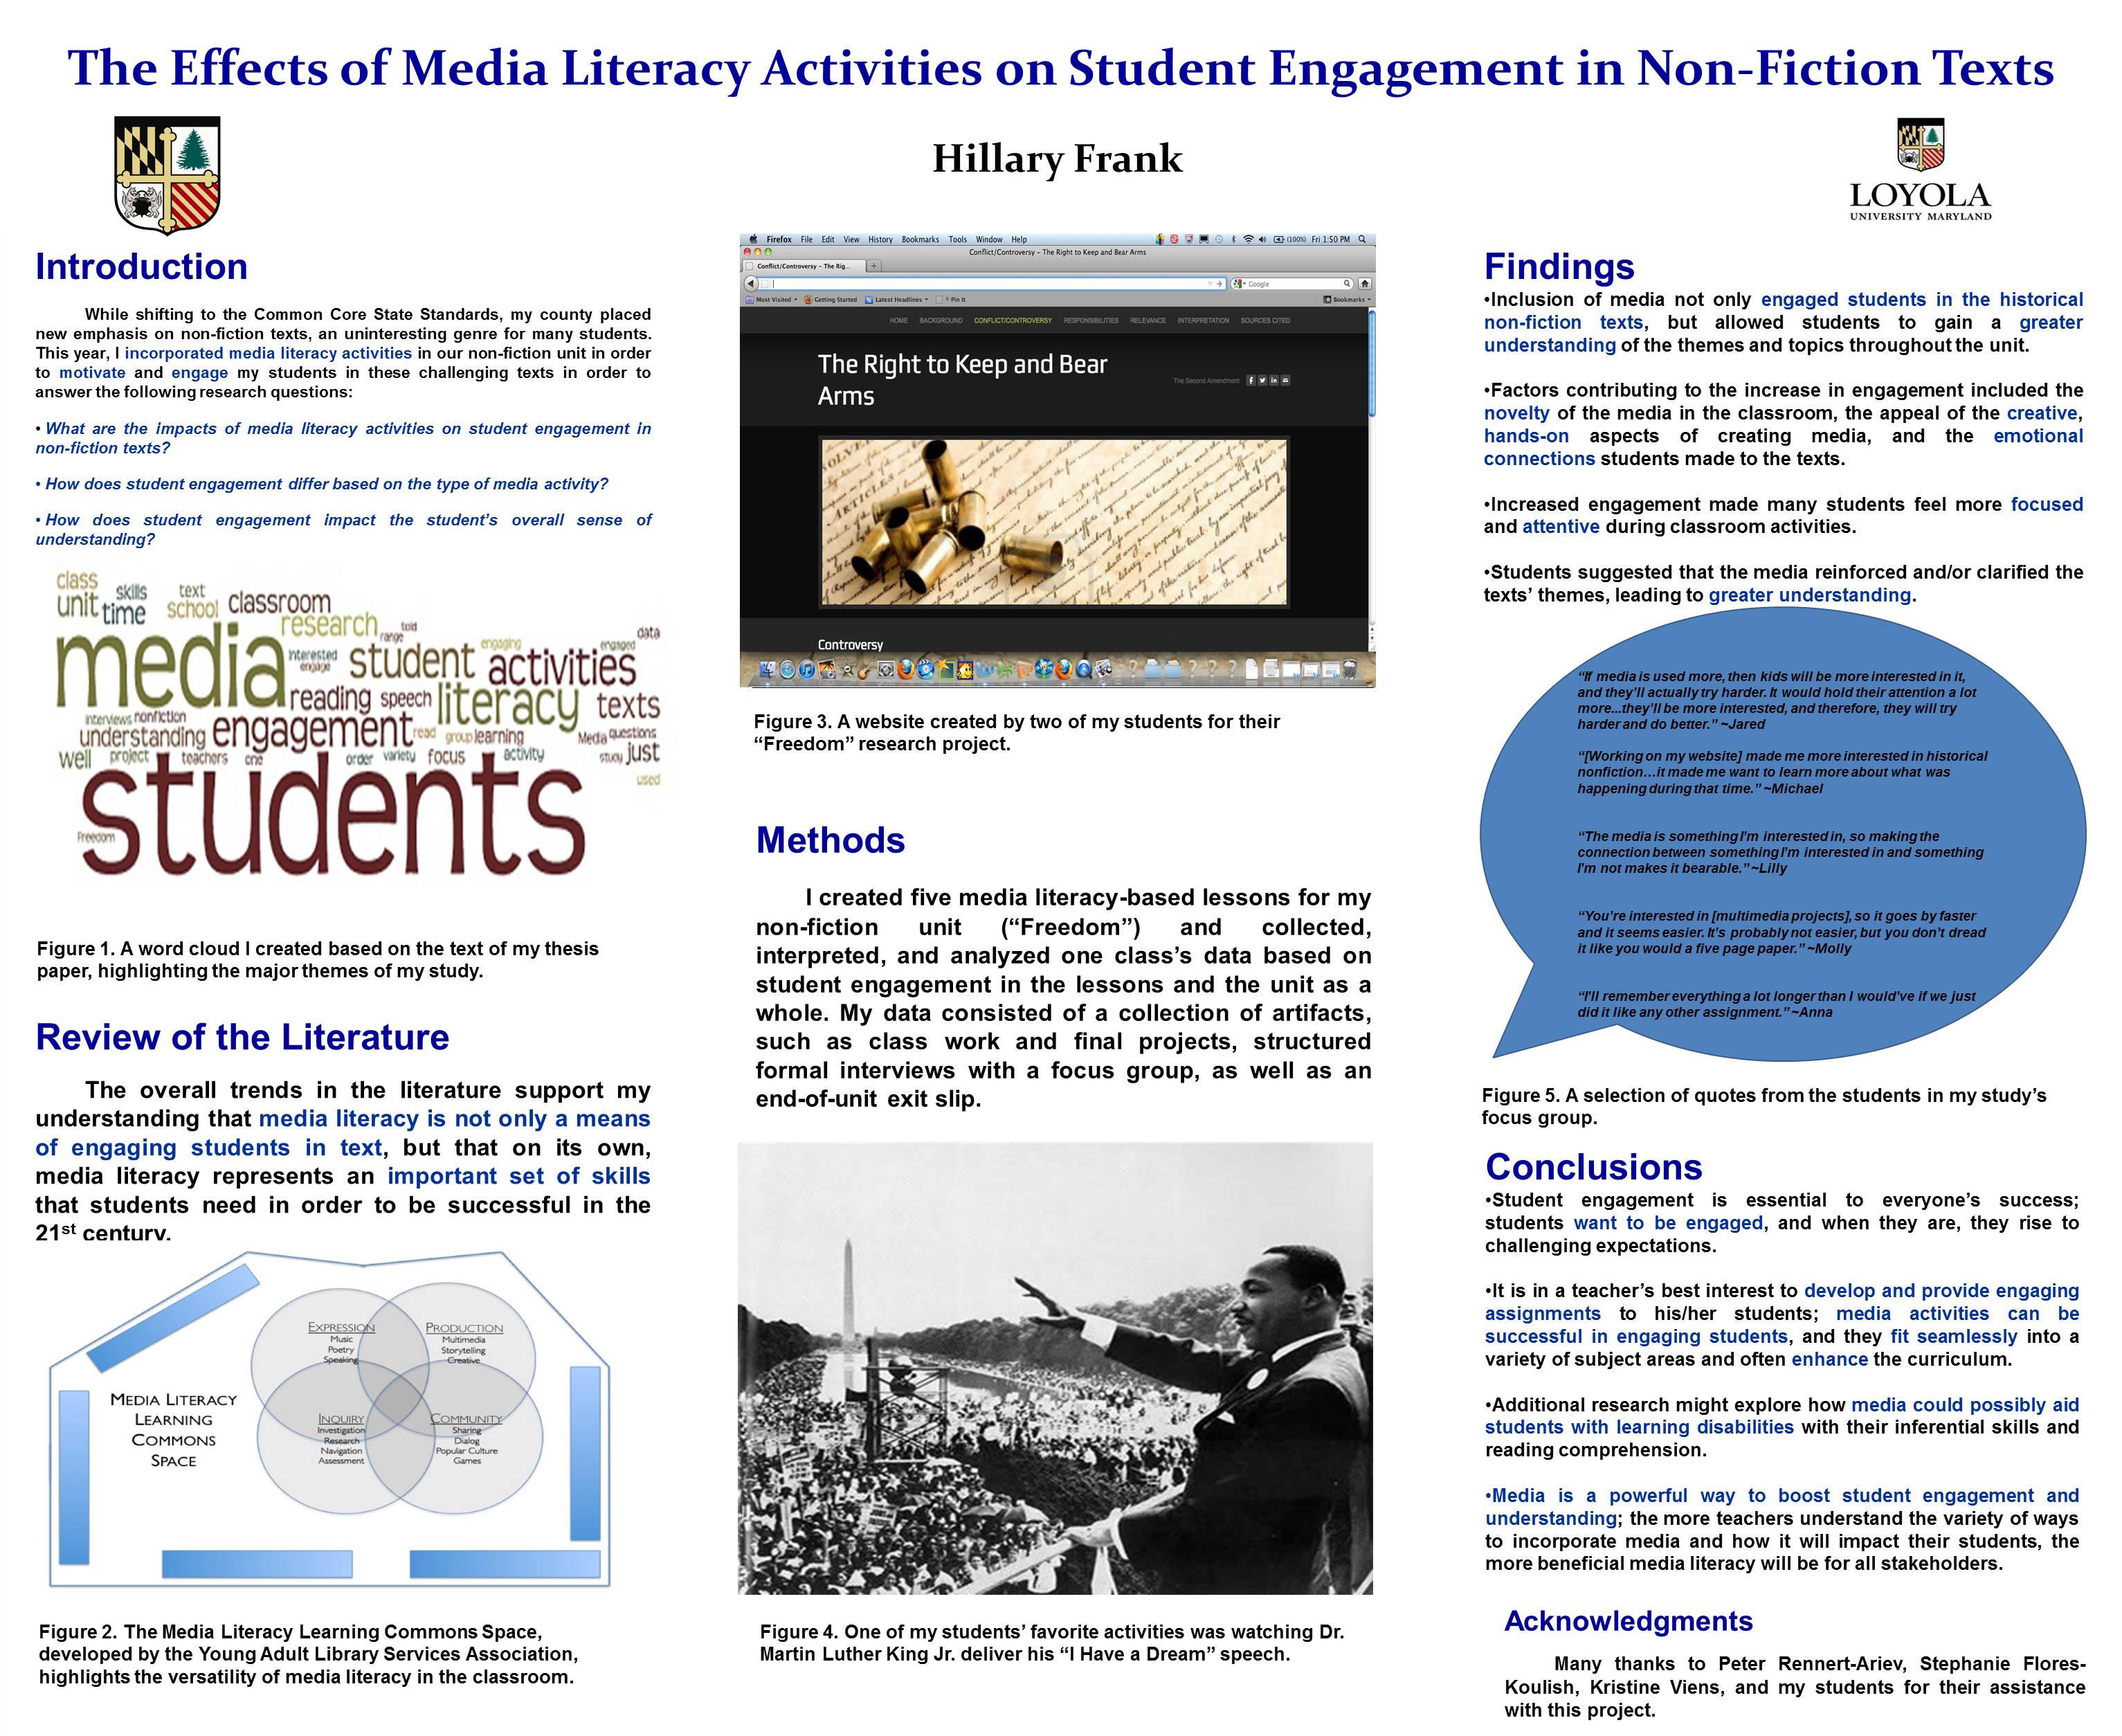 Enlarged poster image: The Effects of Media Literacy Activities on Student Engagement in Non-Fiction Texts